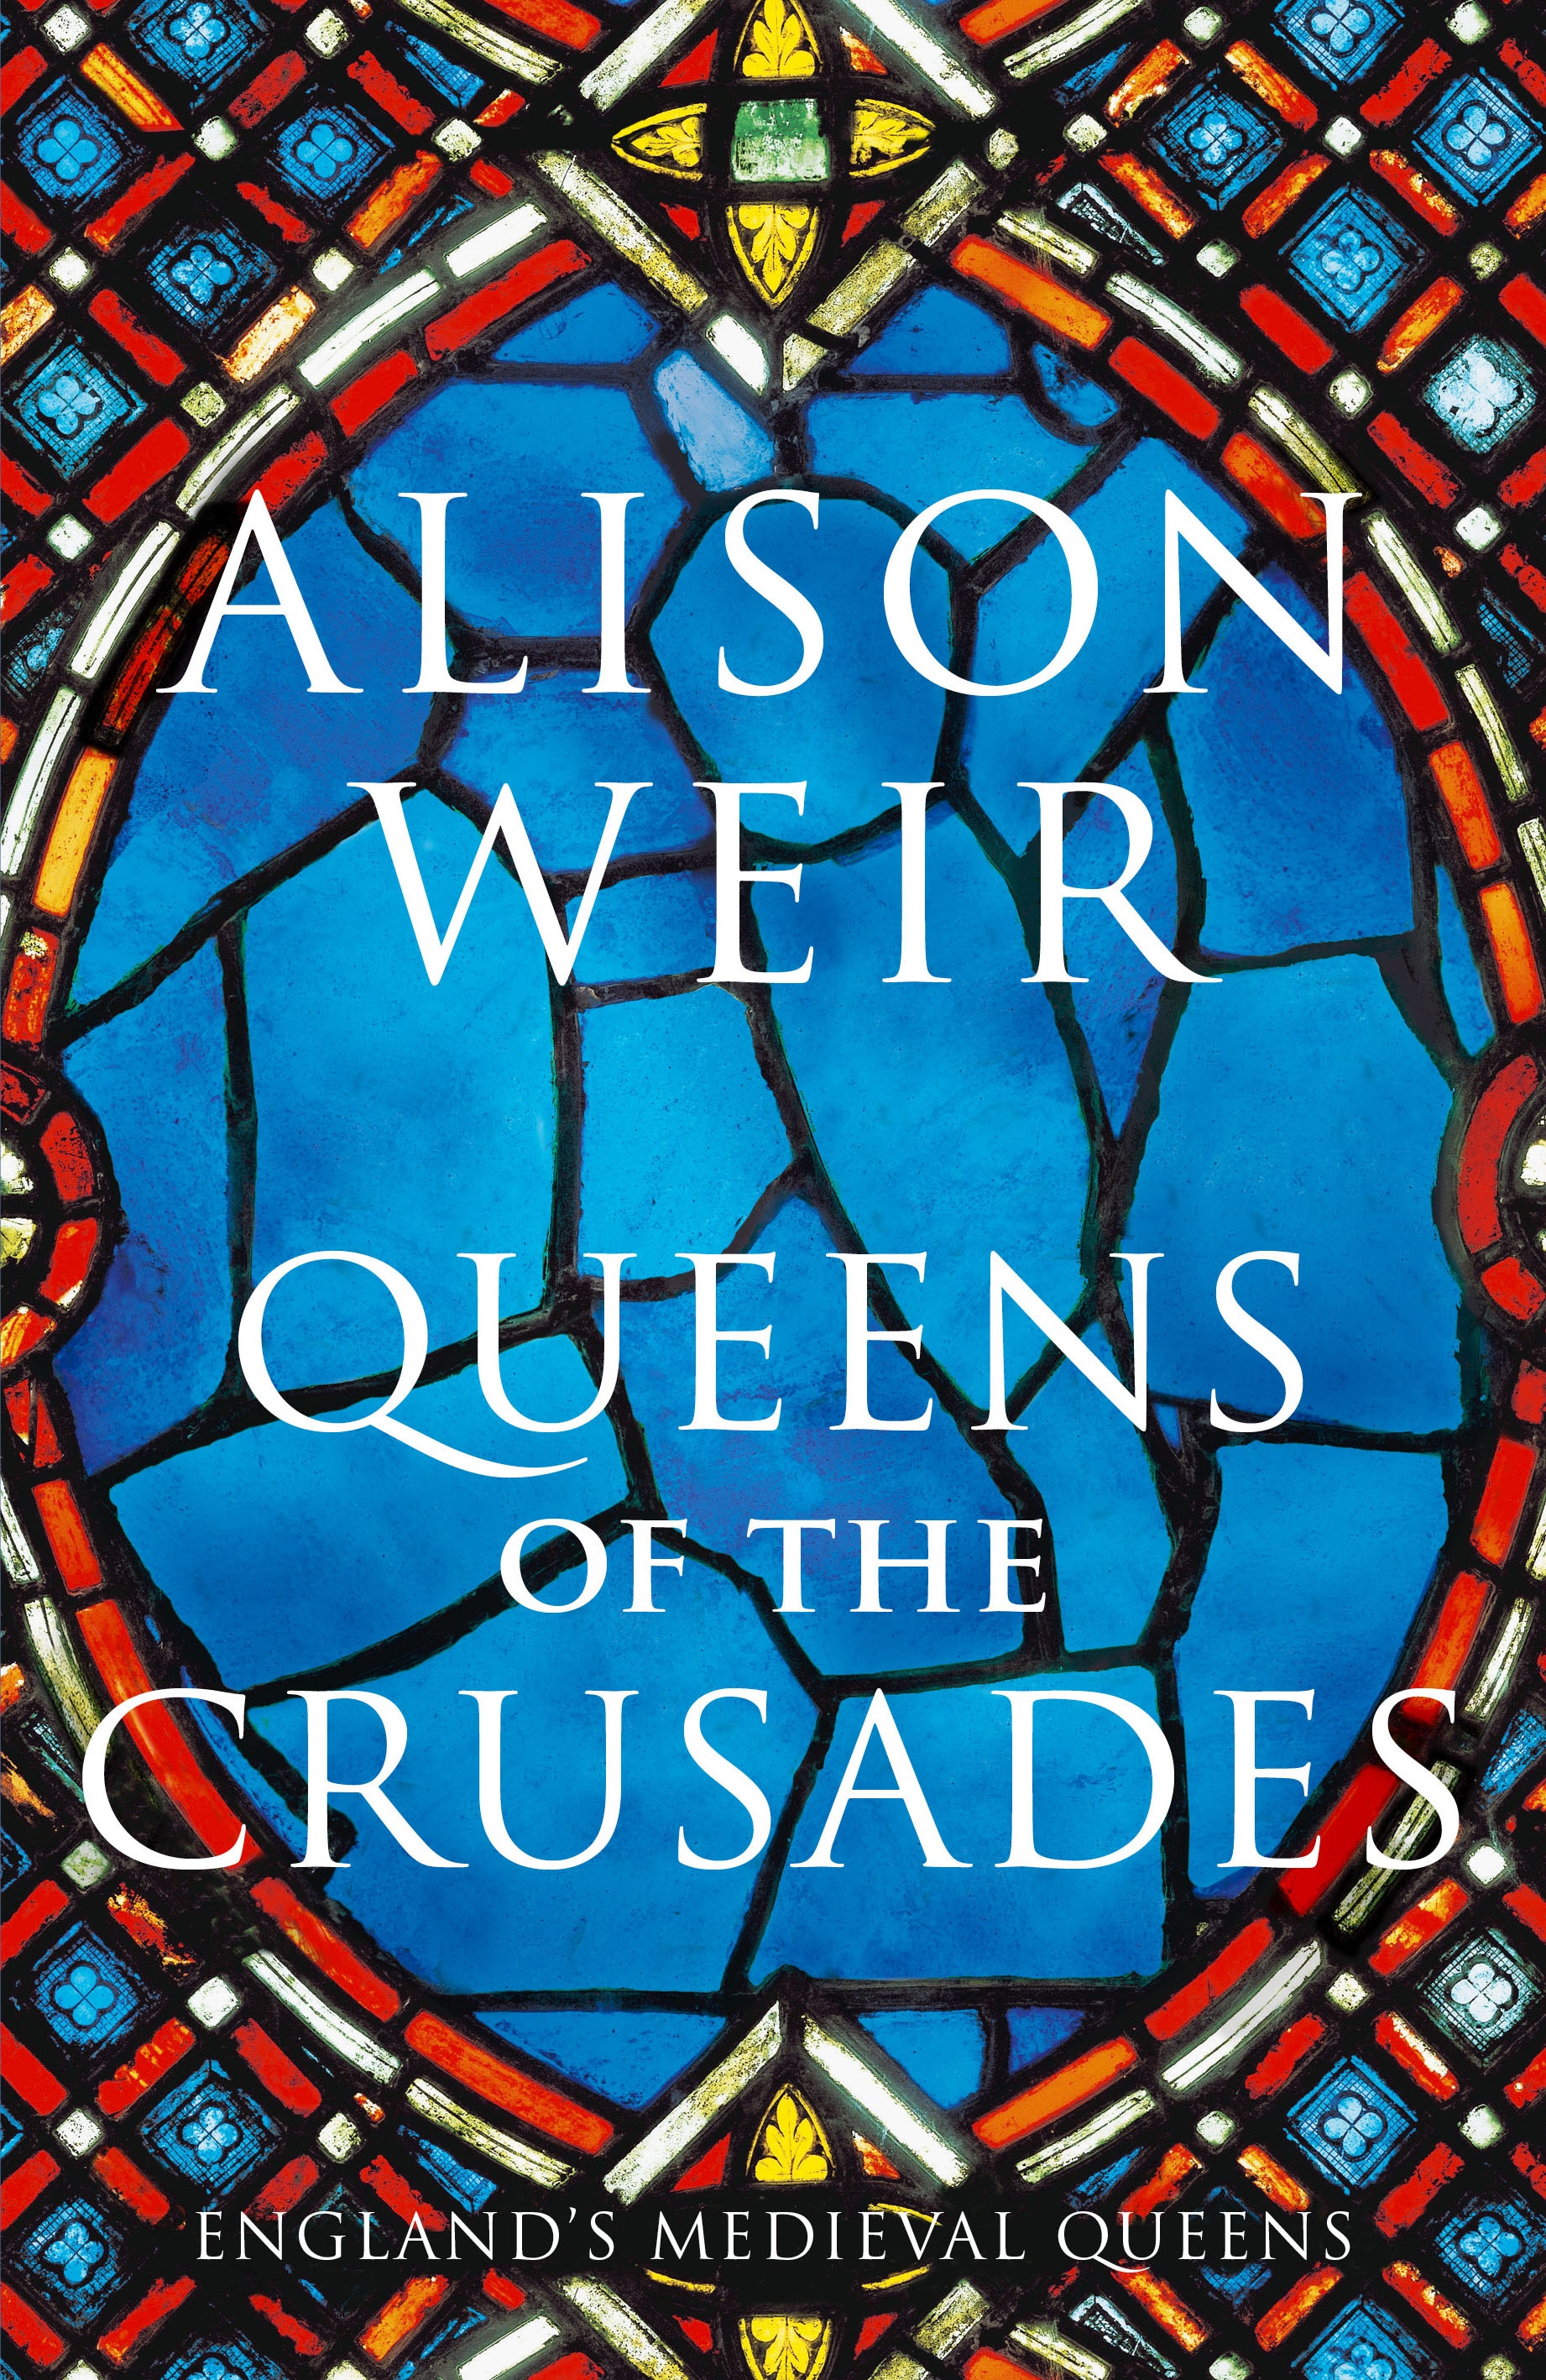 Book “Queens of the Crusades” by Alison Weir — November 5, 2020